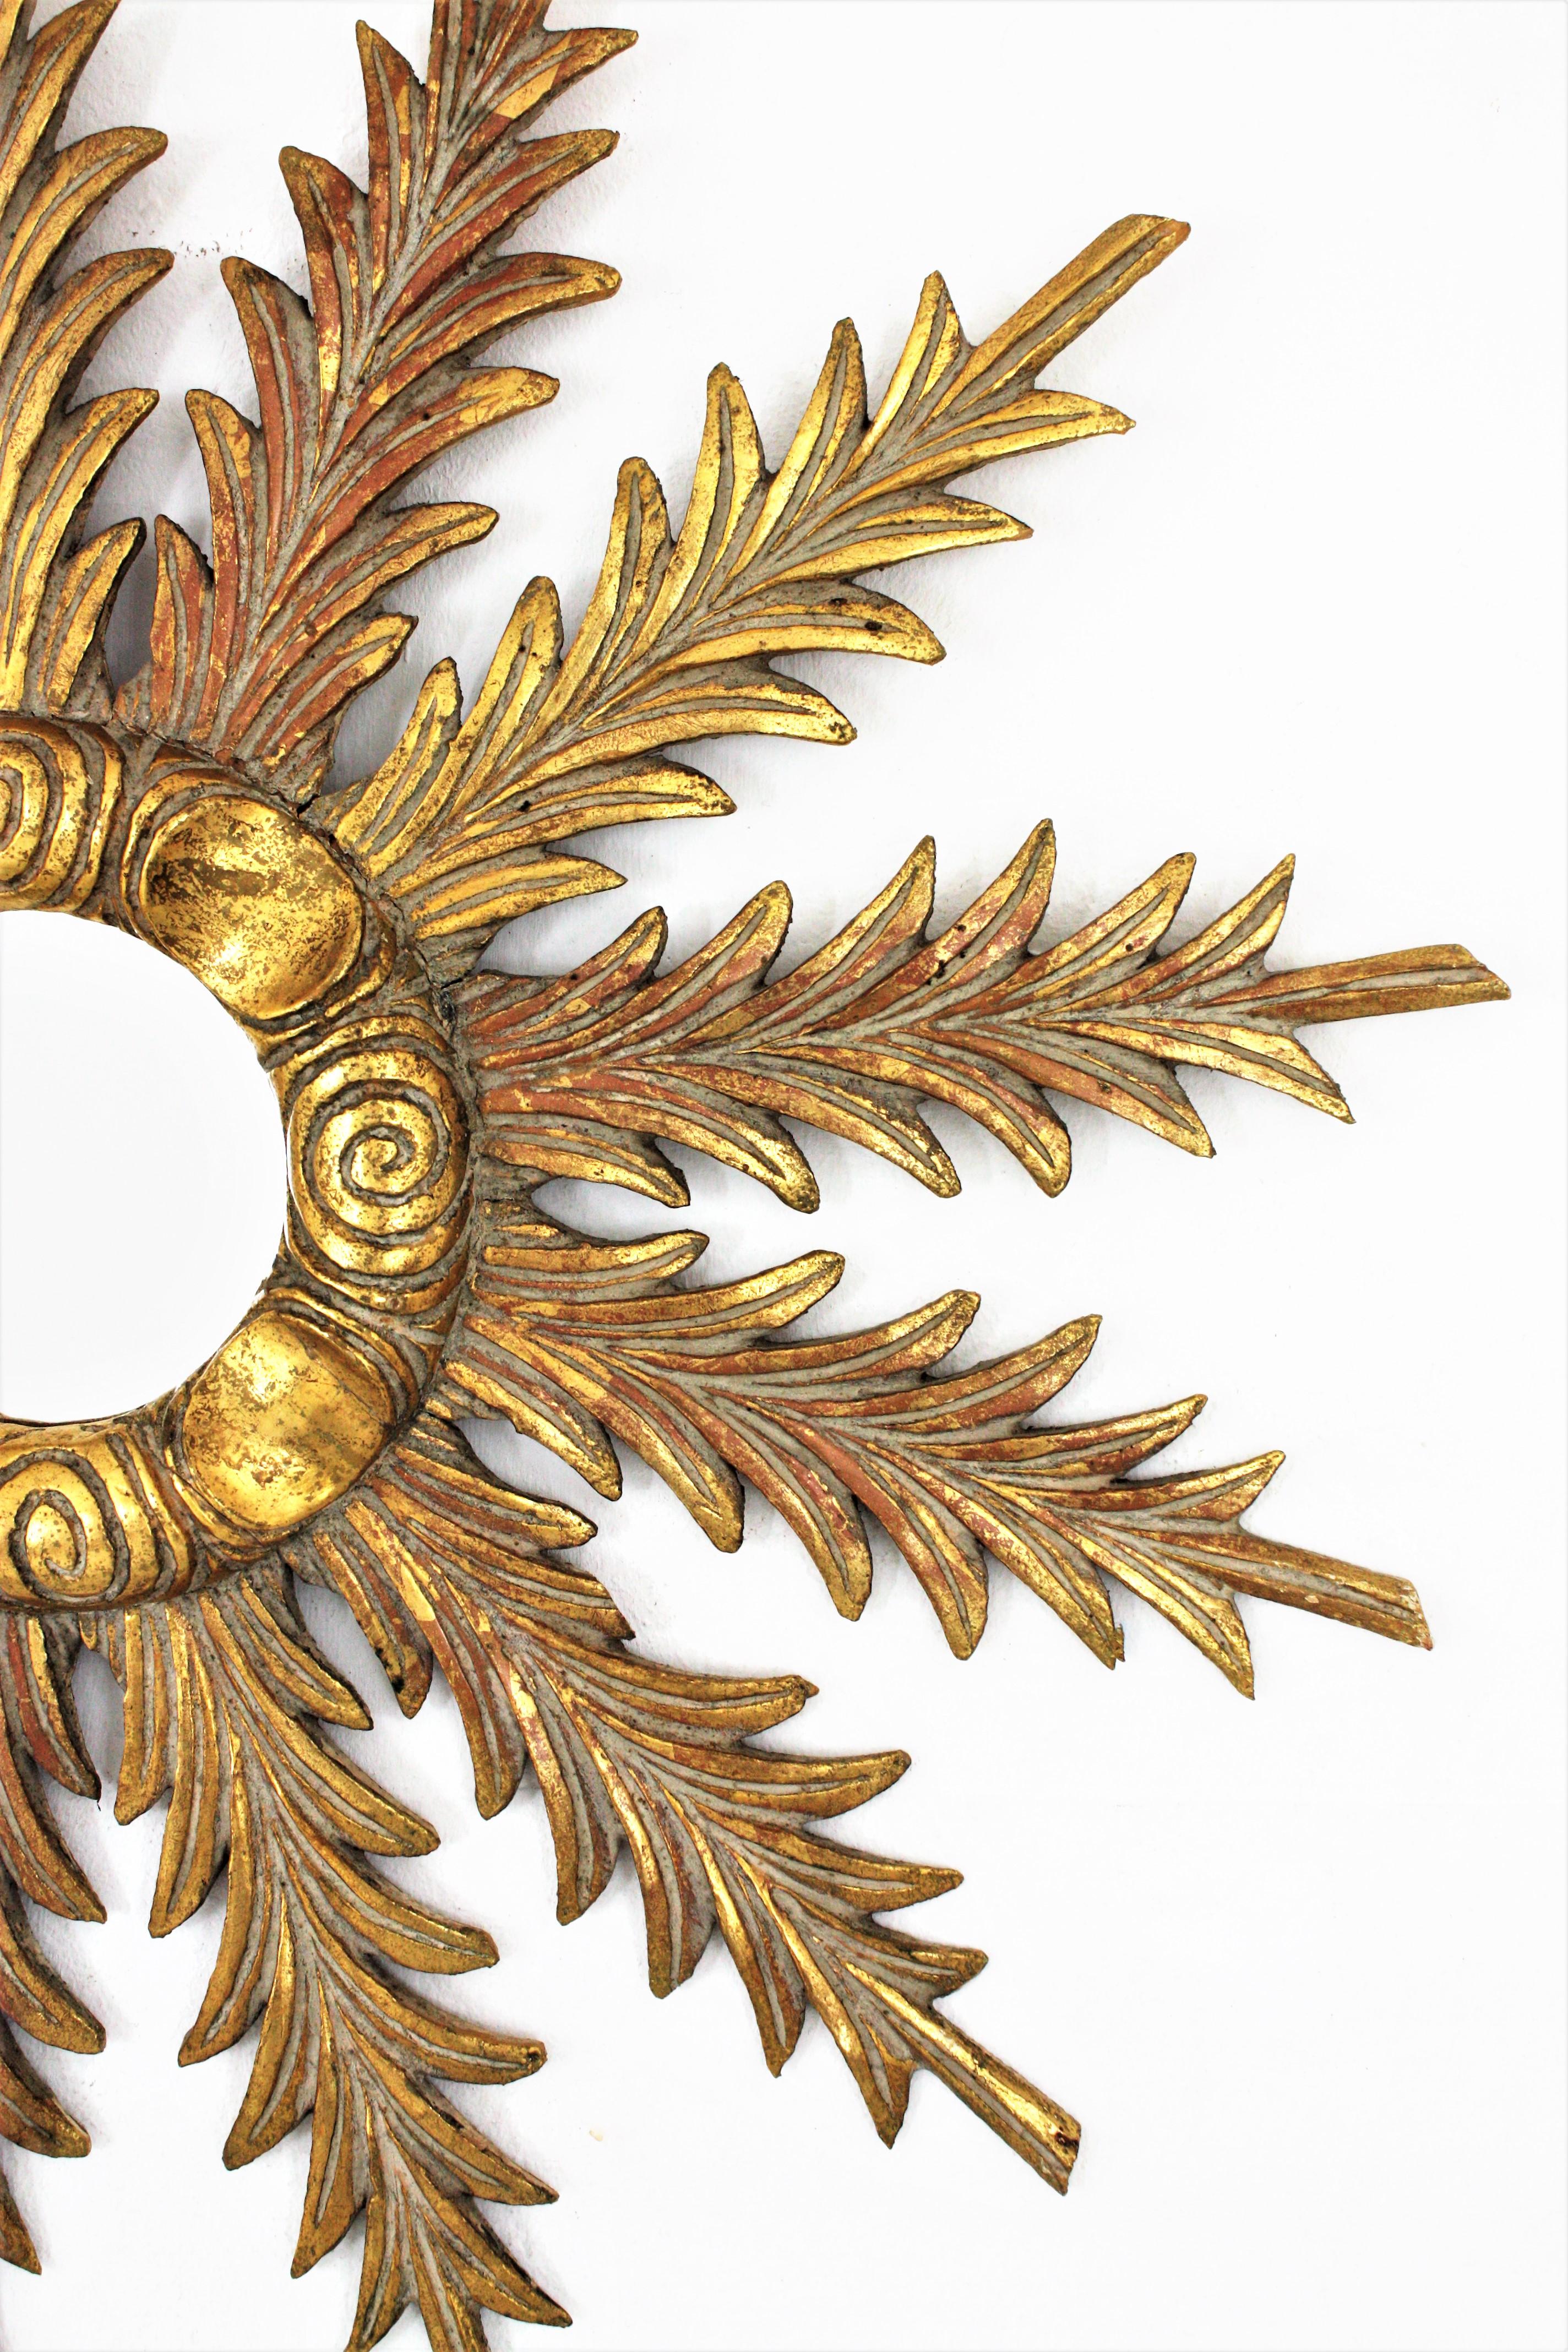 Spanish Sunburst Starburst Giltwood Mirror with Foliage Carvings, 1940s For Sale